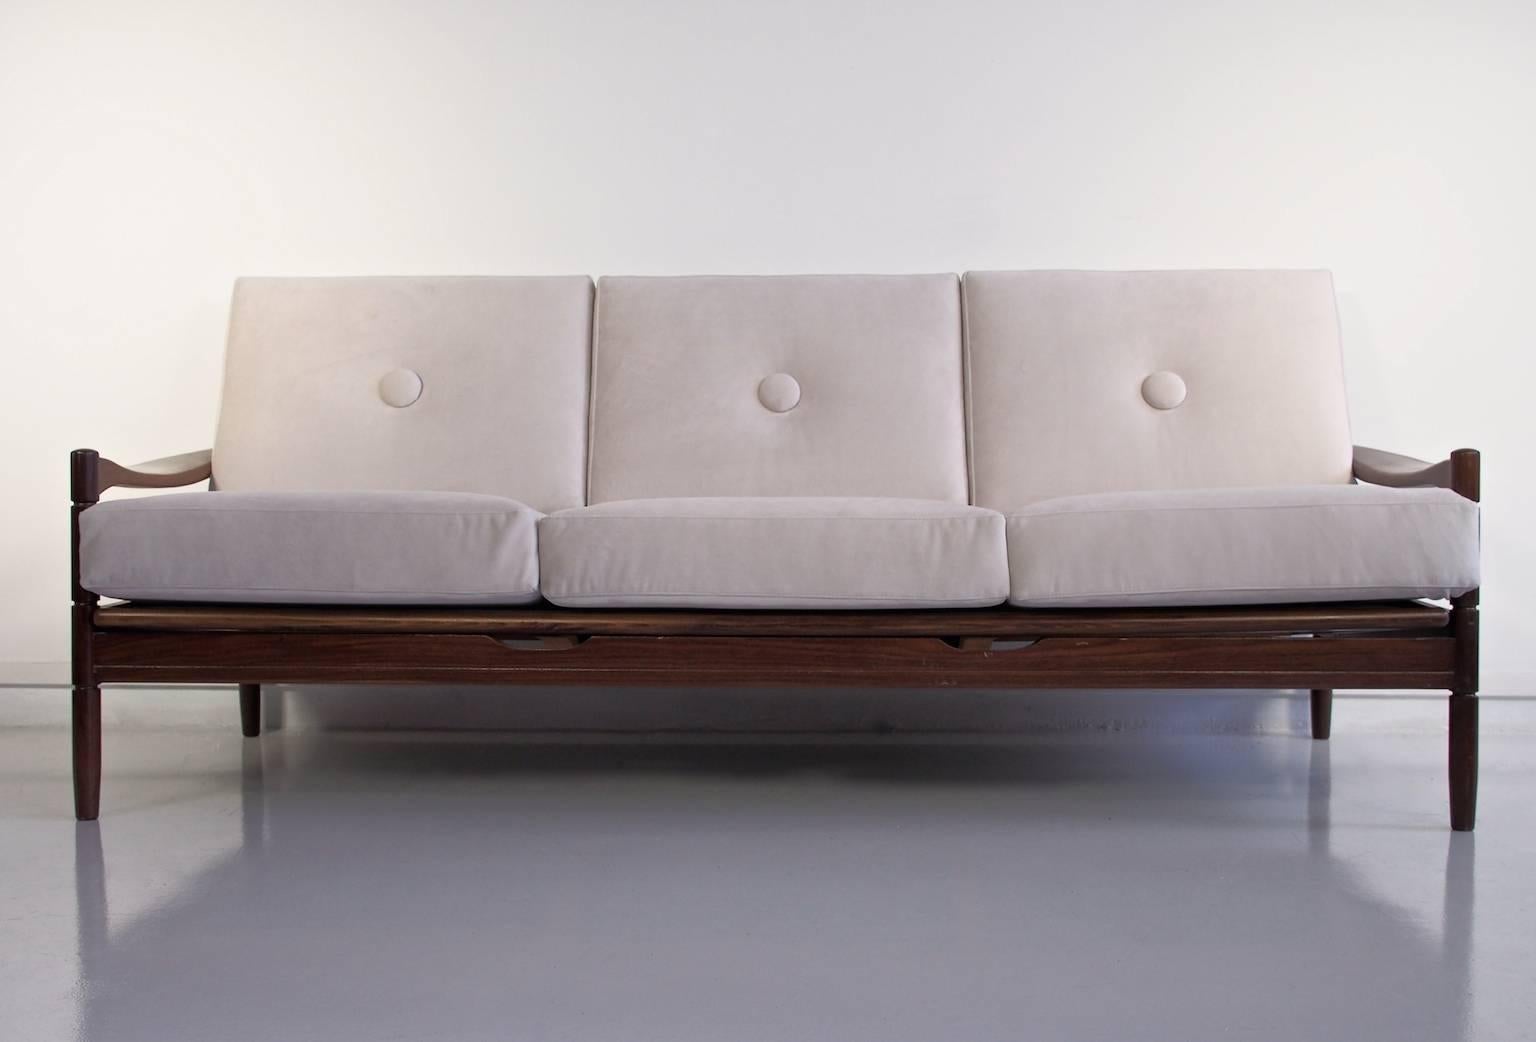 Three-seat sofa in the style of Grete Jalk. The seat can be pulled out slightly to use as a daybed. Recently renewed off-white fabric upholstered seats and back cushions. Dark wood frame.
Dimensions: Width 212 cm, height 70 cm (height with cushions